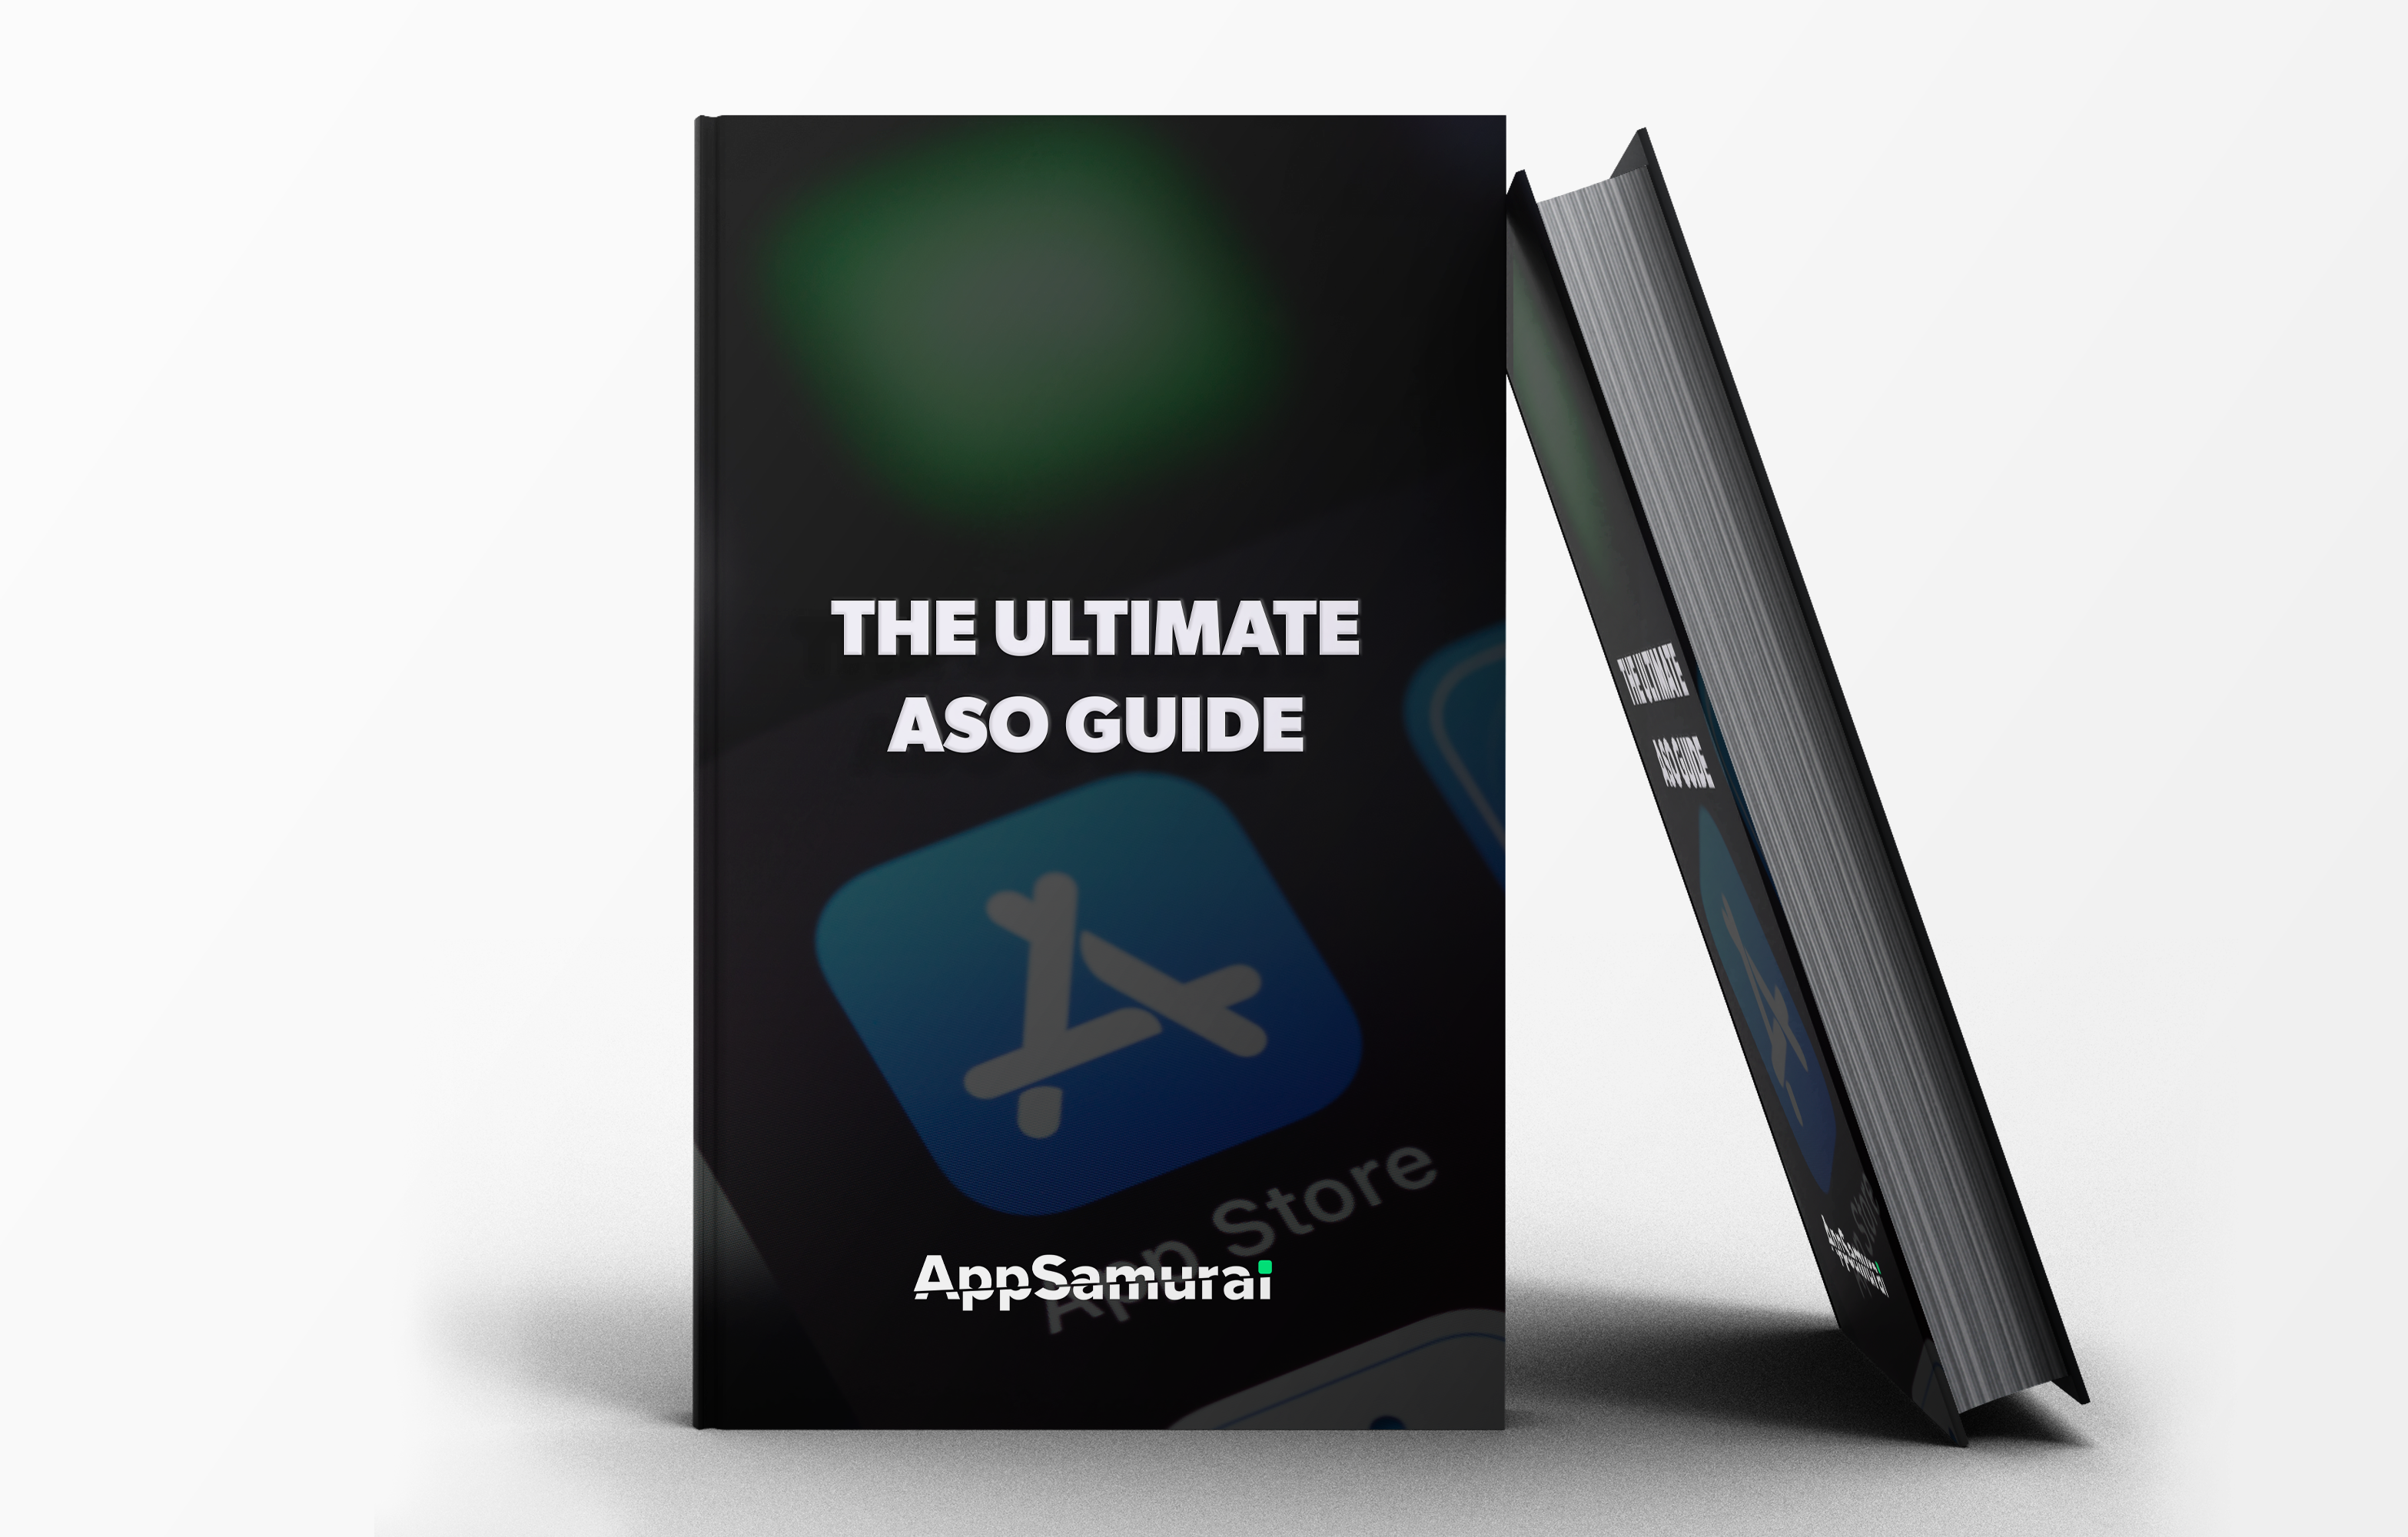 THE ULTIMATE ASO GUIDE -